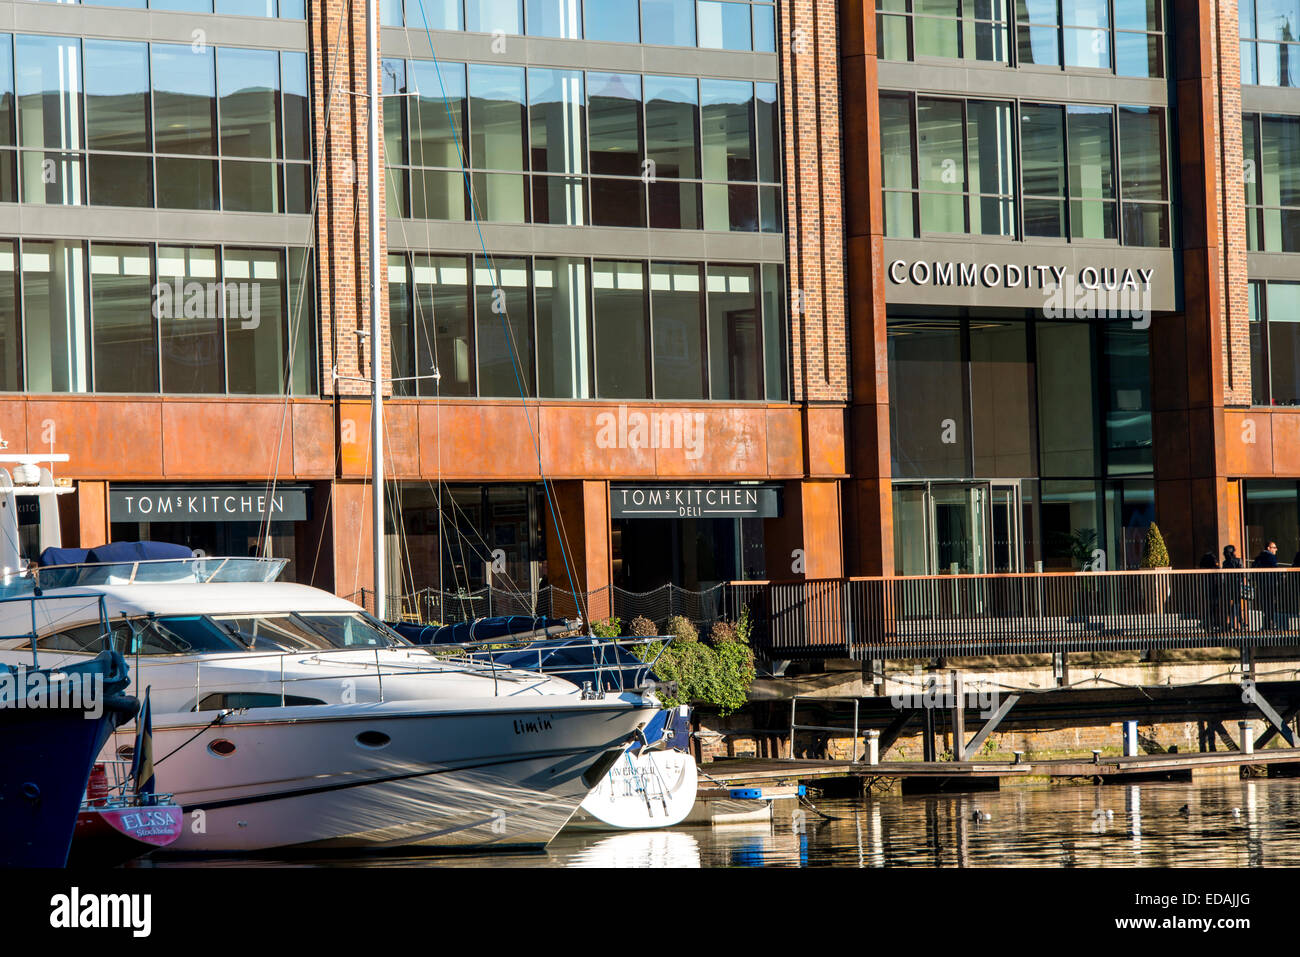 A luxury yacht moored in St Katharine Docks, East London, outside Tom's Kitchen restaurant and Commodity Quay office development Stock Photo